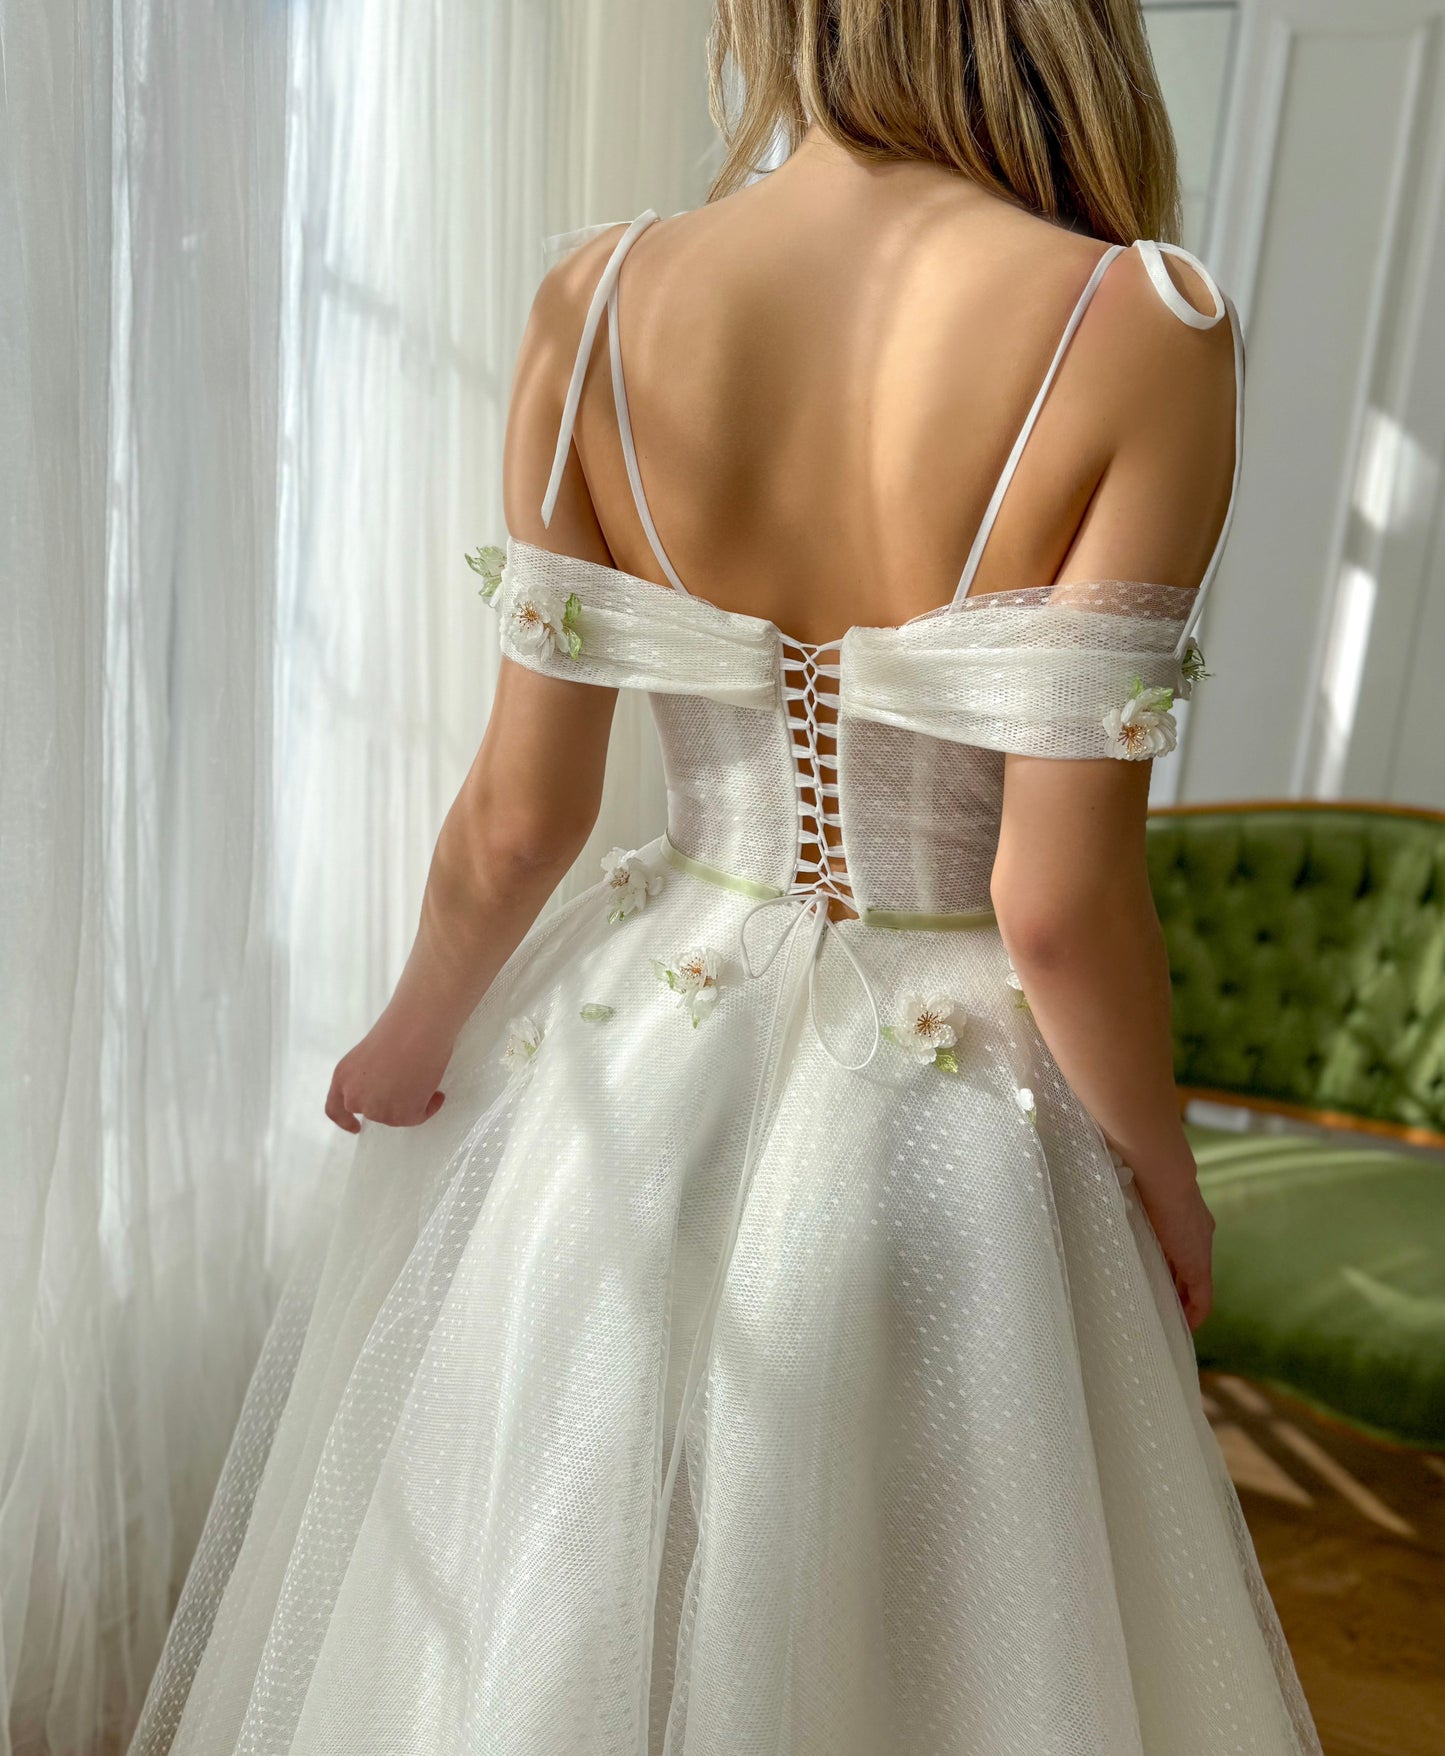 White A-Line dress with spaghetti straps and embroidery